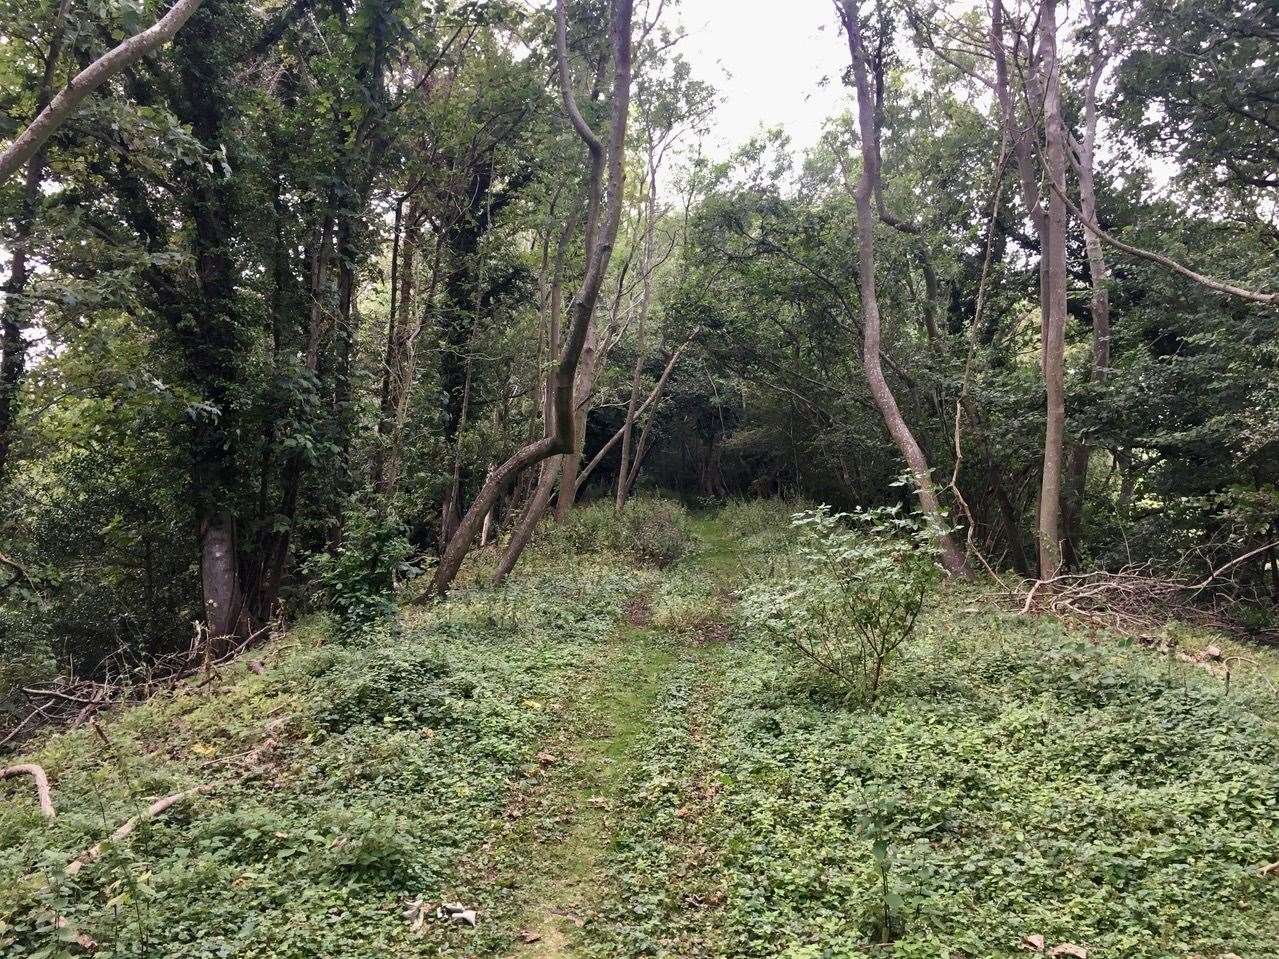 The woodland surrounds part of the old railway embankment. Photo: Cllr Rory Love